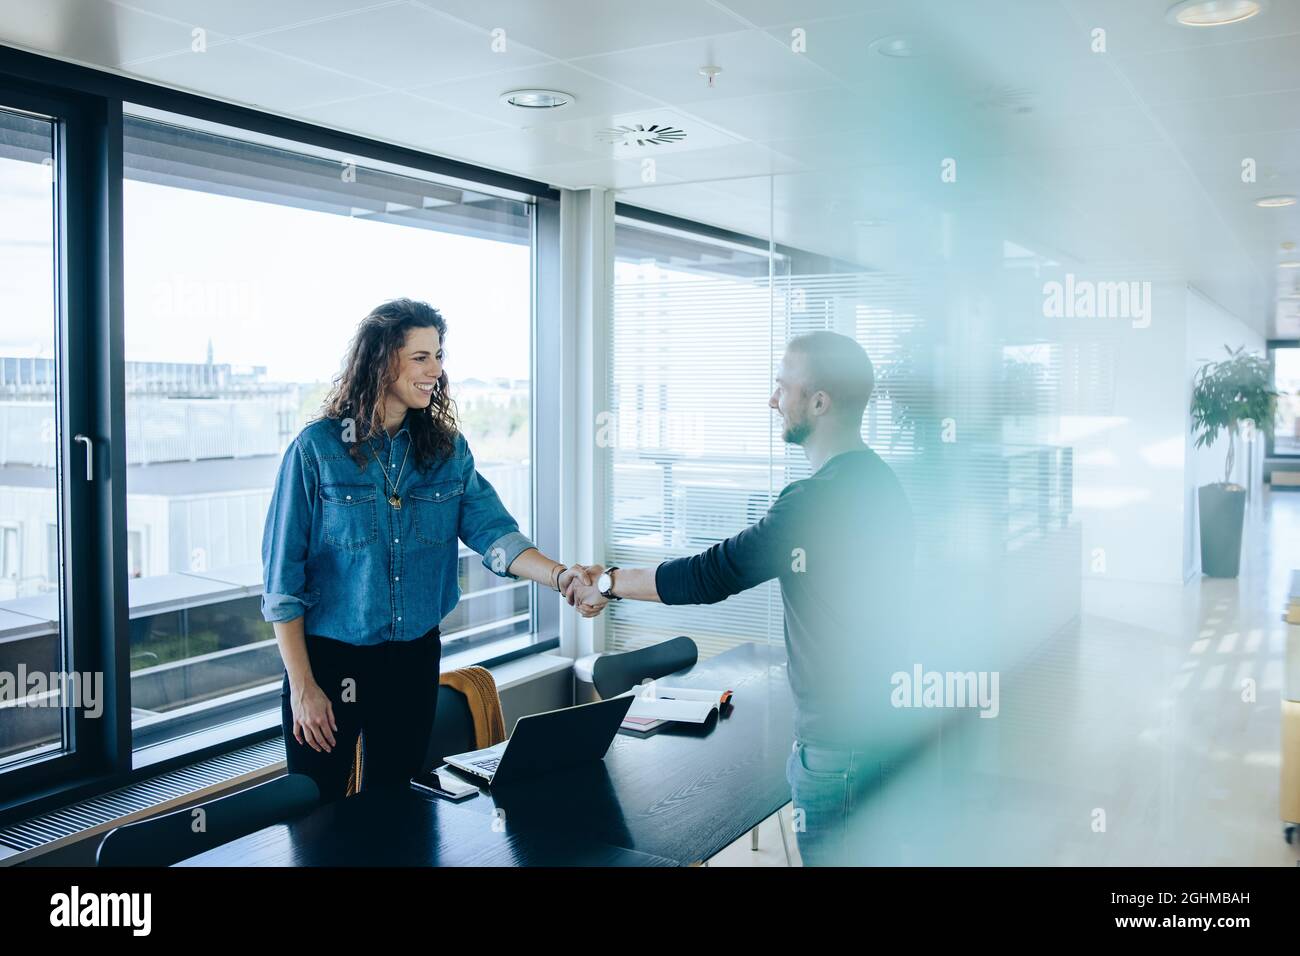 Employer shaking hand with man after successful job interview. businesswoman congratulating and shaking hands with job applicant in office boardroom. Stock Photo